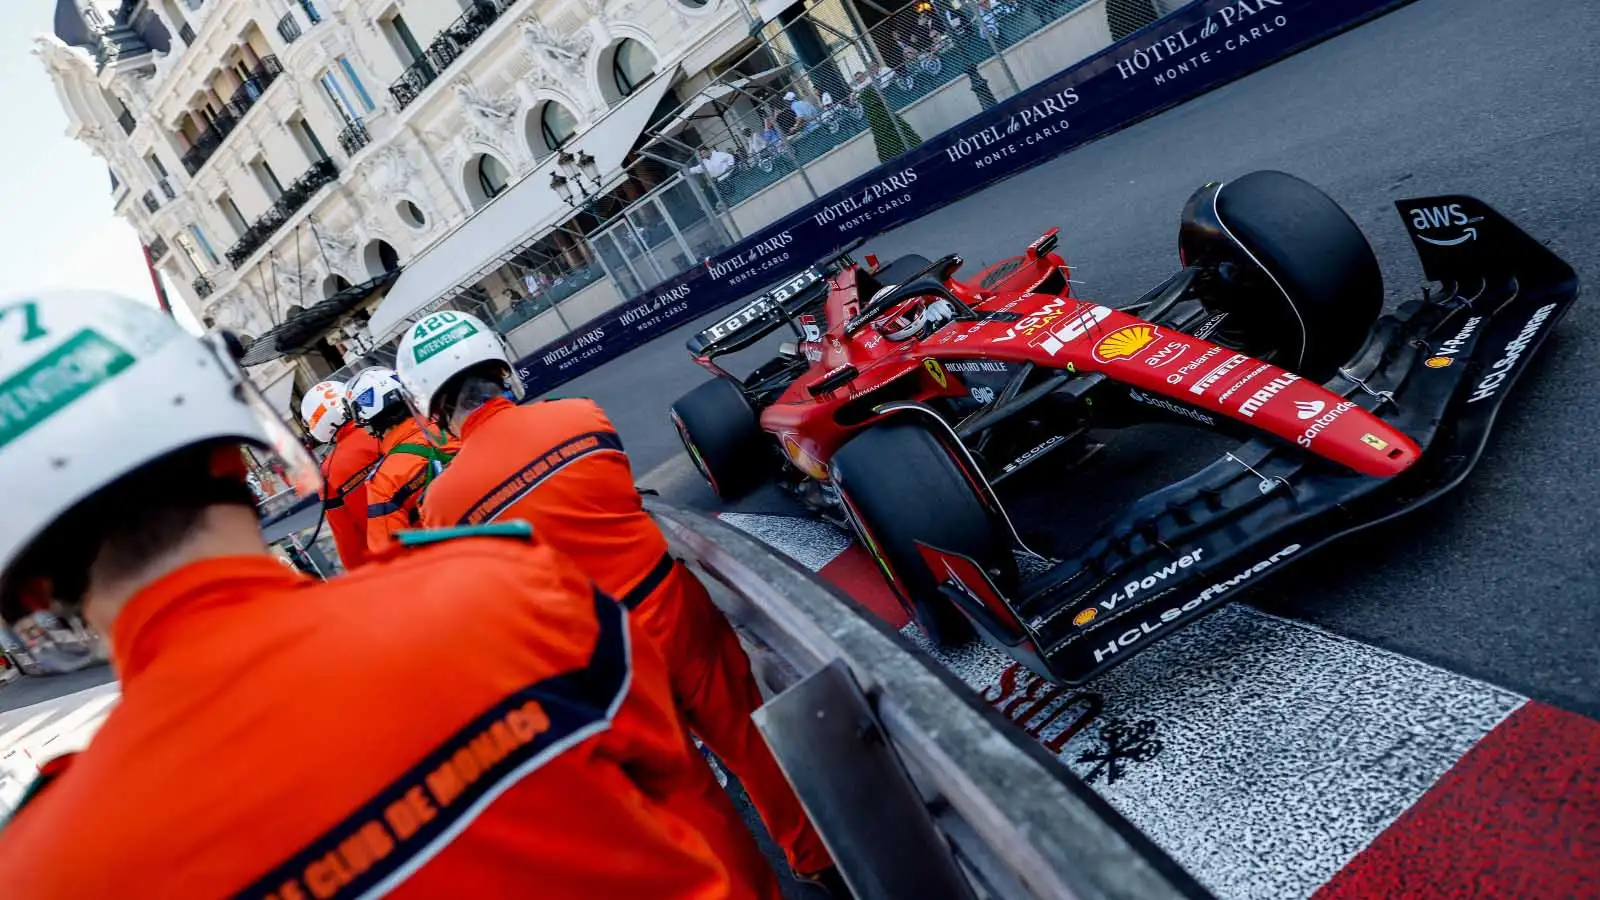 Charles Leclerc gets close to the barrier. Monaco May F1 2023 results.